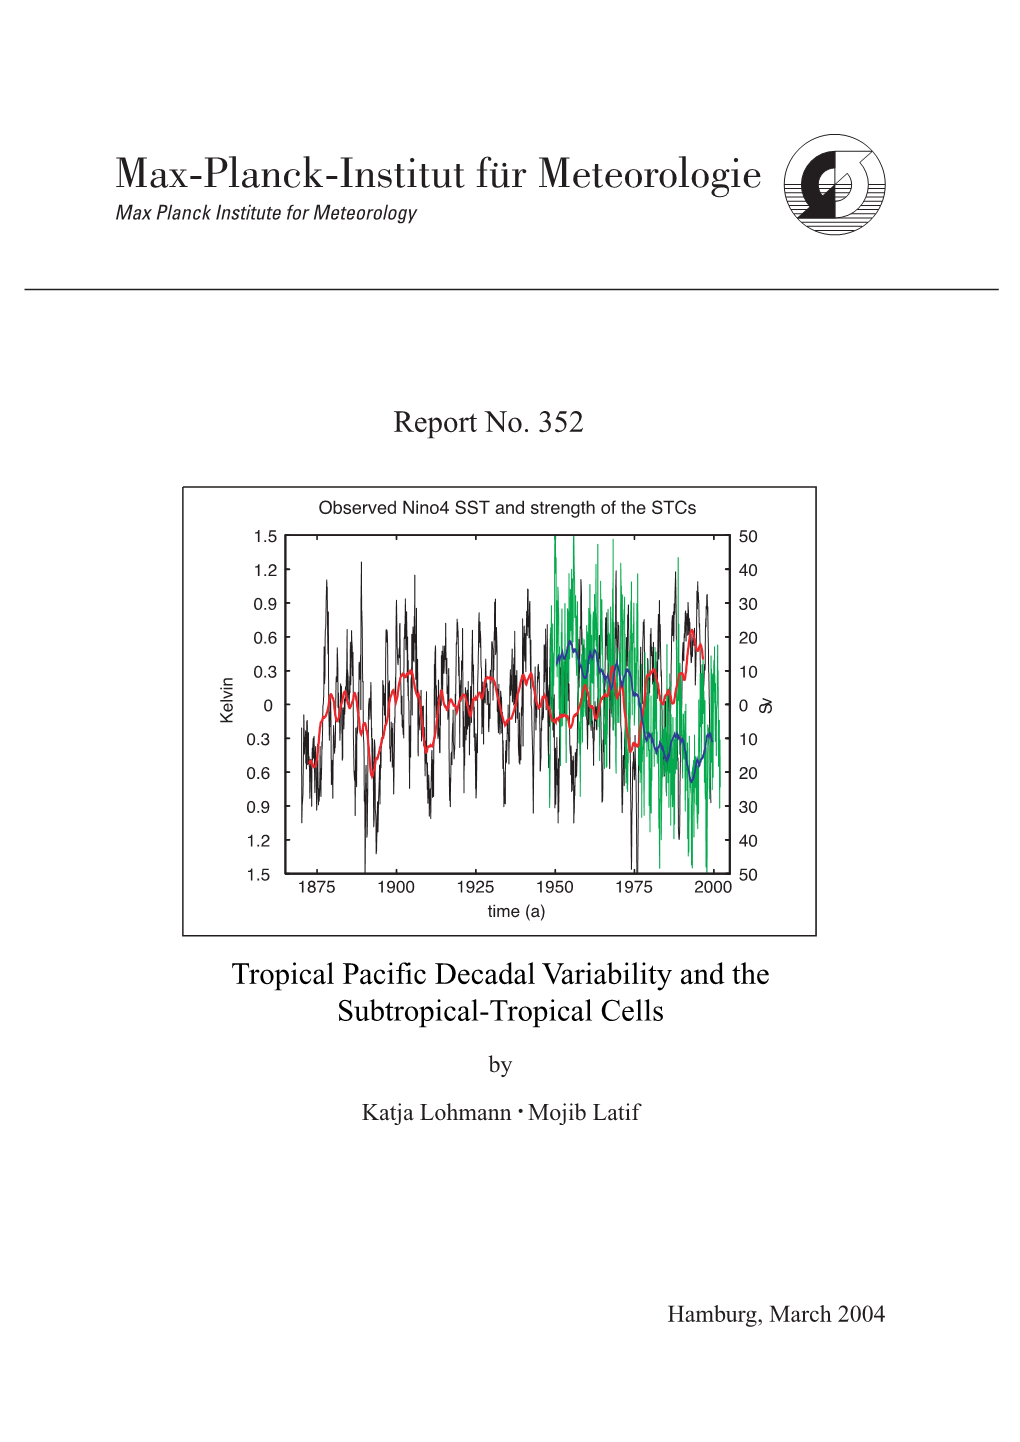 Tropical Pacific Decadal Variability and the Subtropical-Tropical Cells